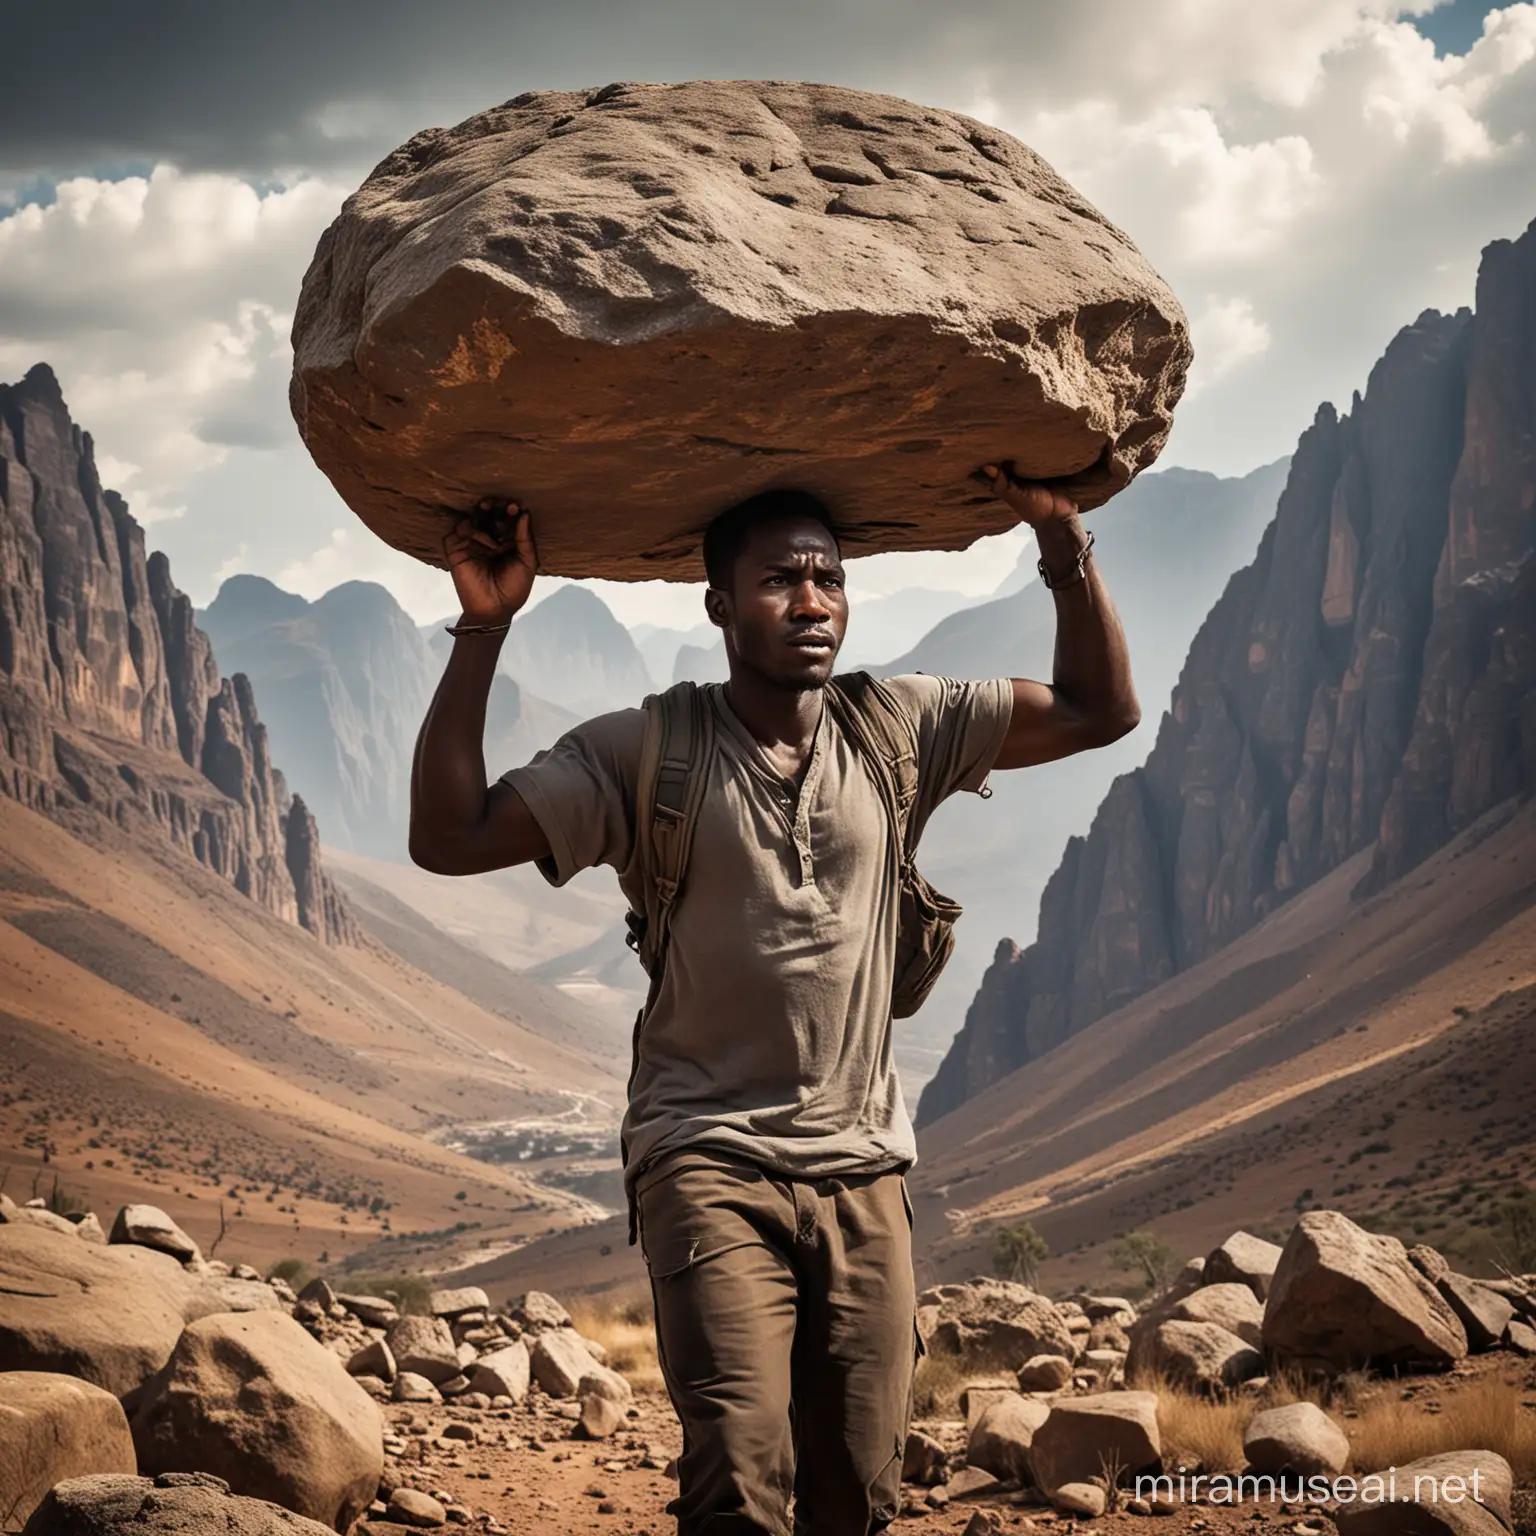 Strong Black African Man Carrying Rock in Dramatic Mountainous Environment